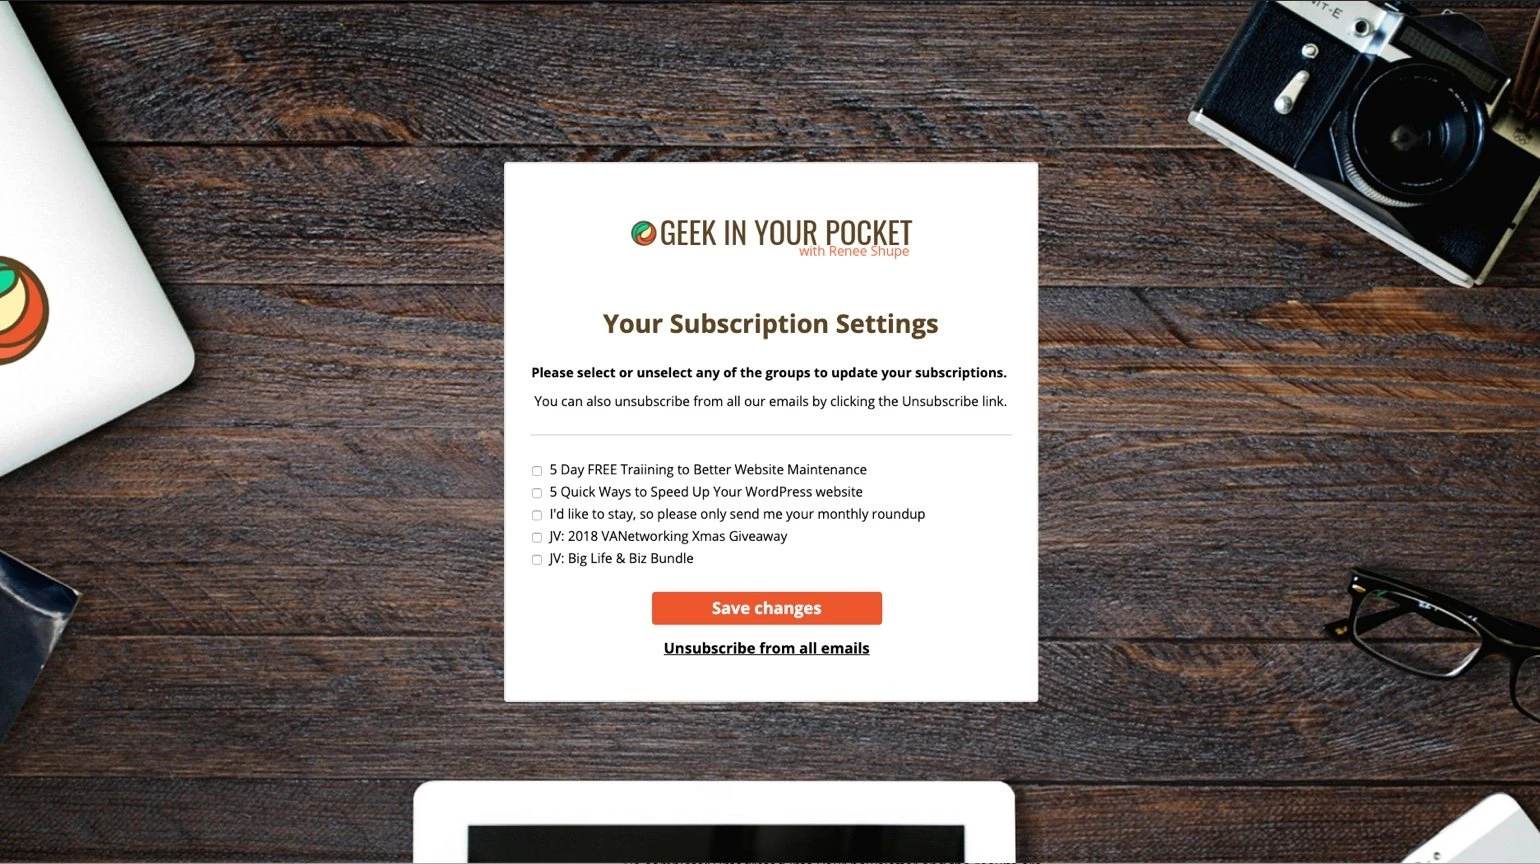 Geek in your pocket unsubscribe page example